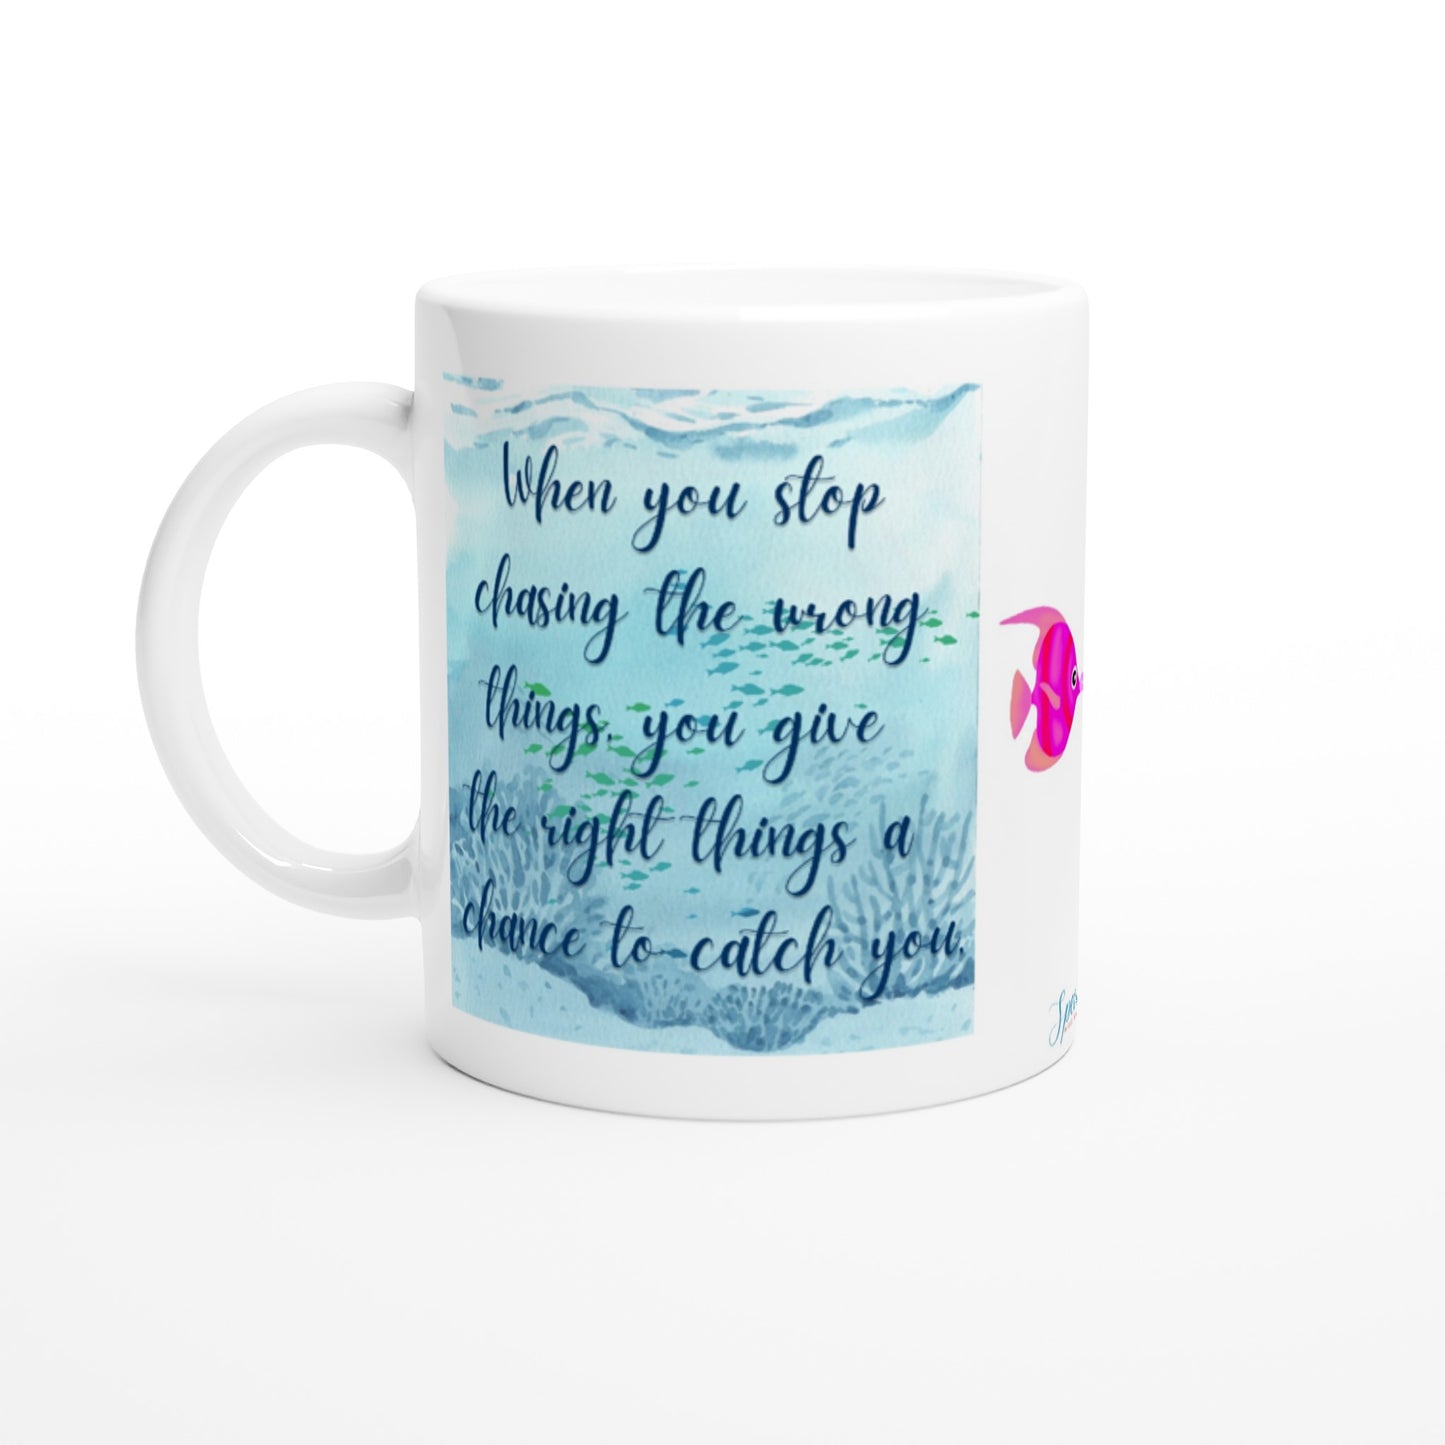 "When you stop chasing the wrong things" 11 oz. Mug front view